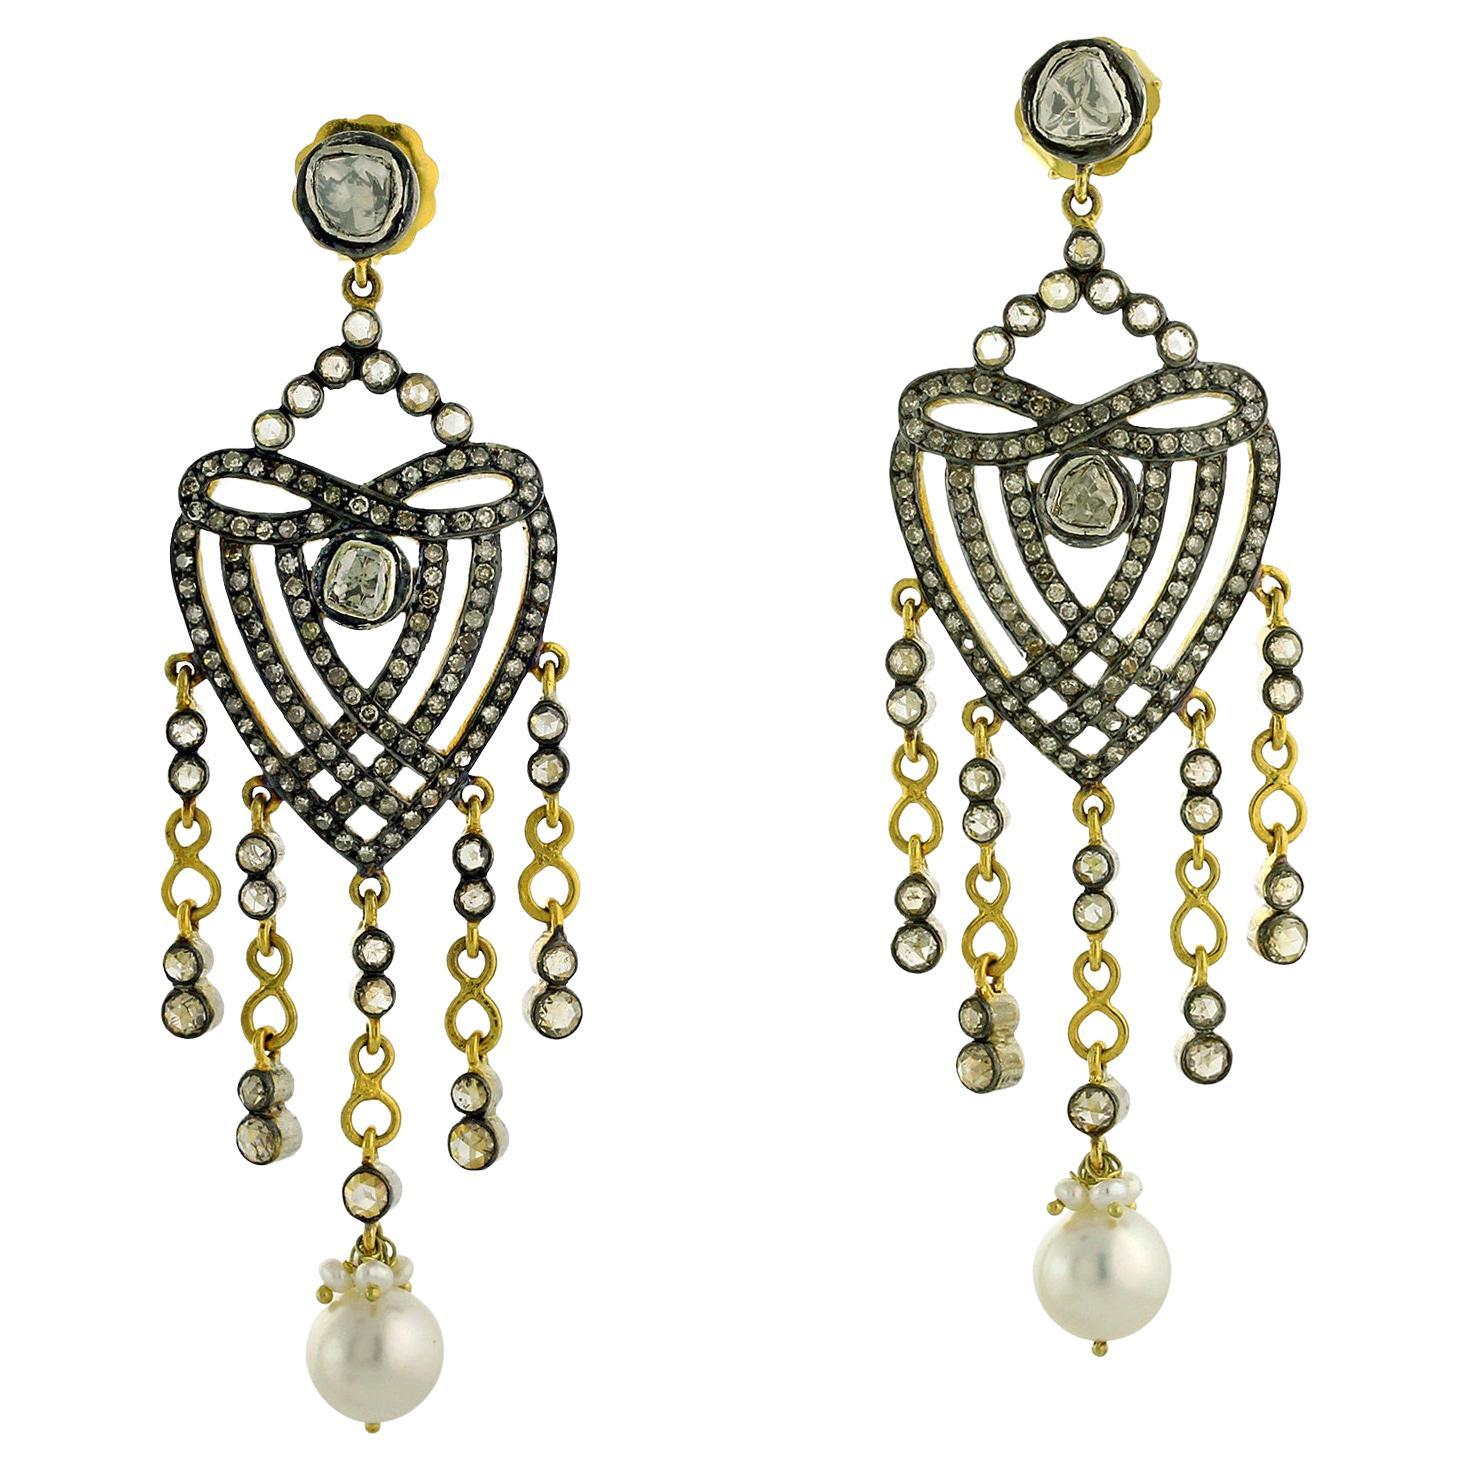 Infinity & Heart Shaped Earrings with Pearl & Pave Diamonds in Gold & Silver